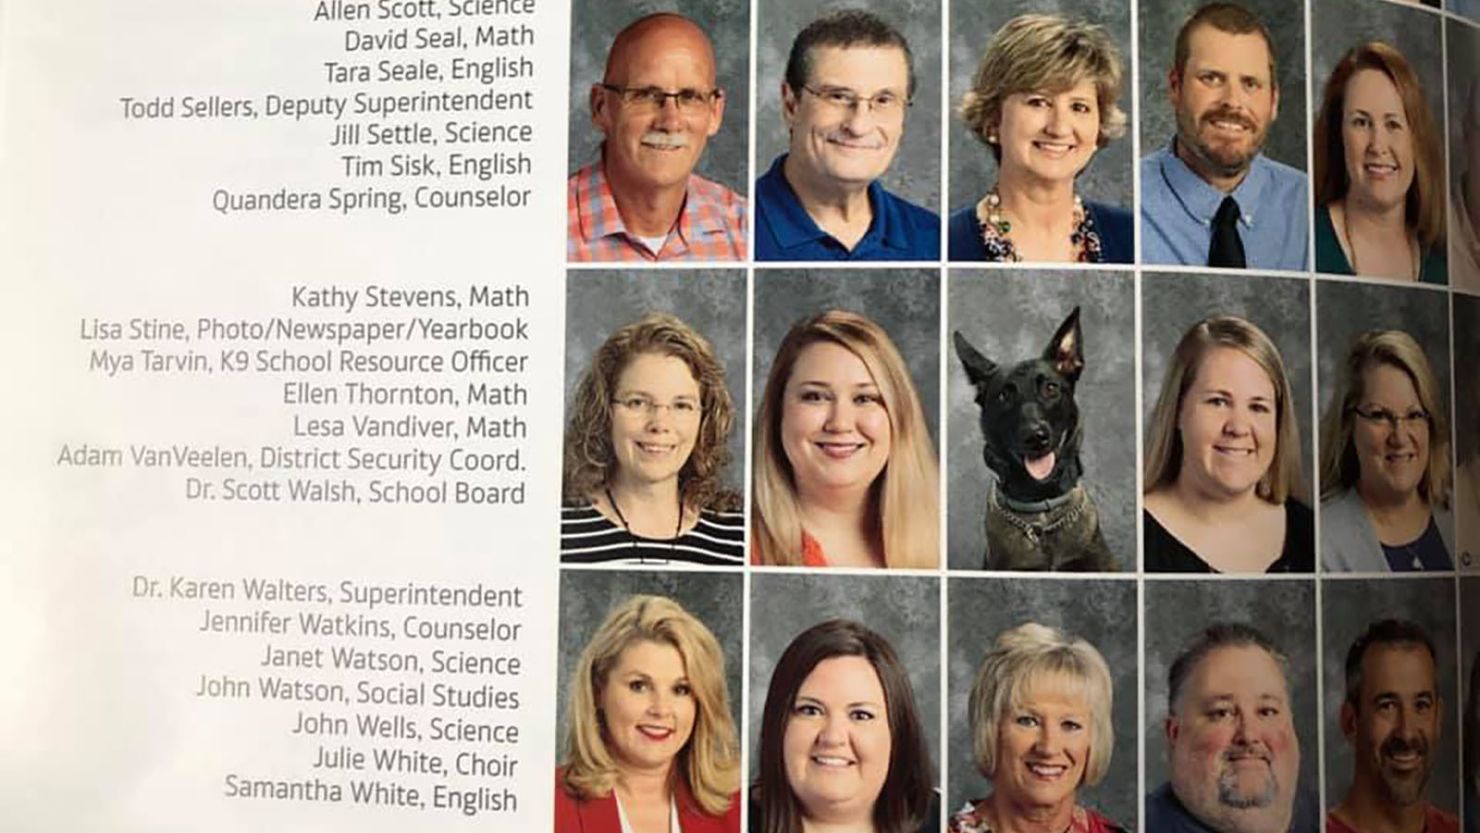 Quick quiz! Try to find Mya, the K9 school resource officer at Bryant High School, in the photo 